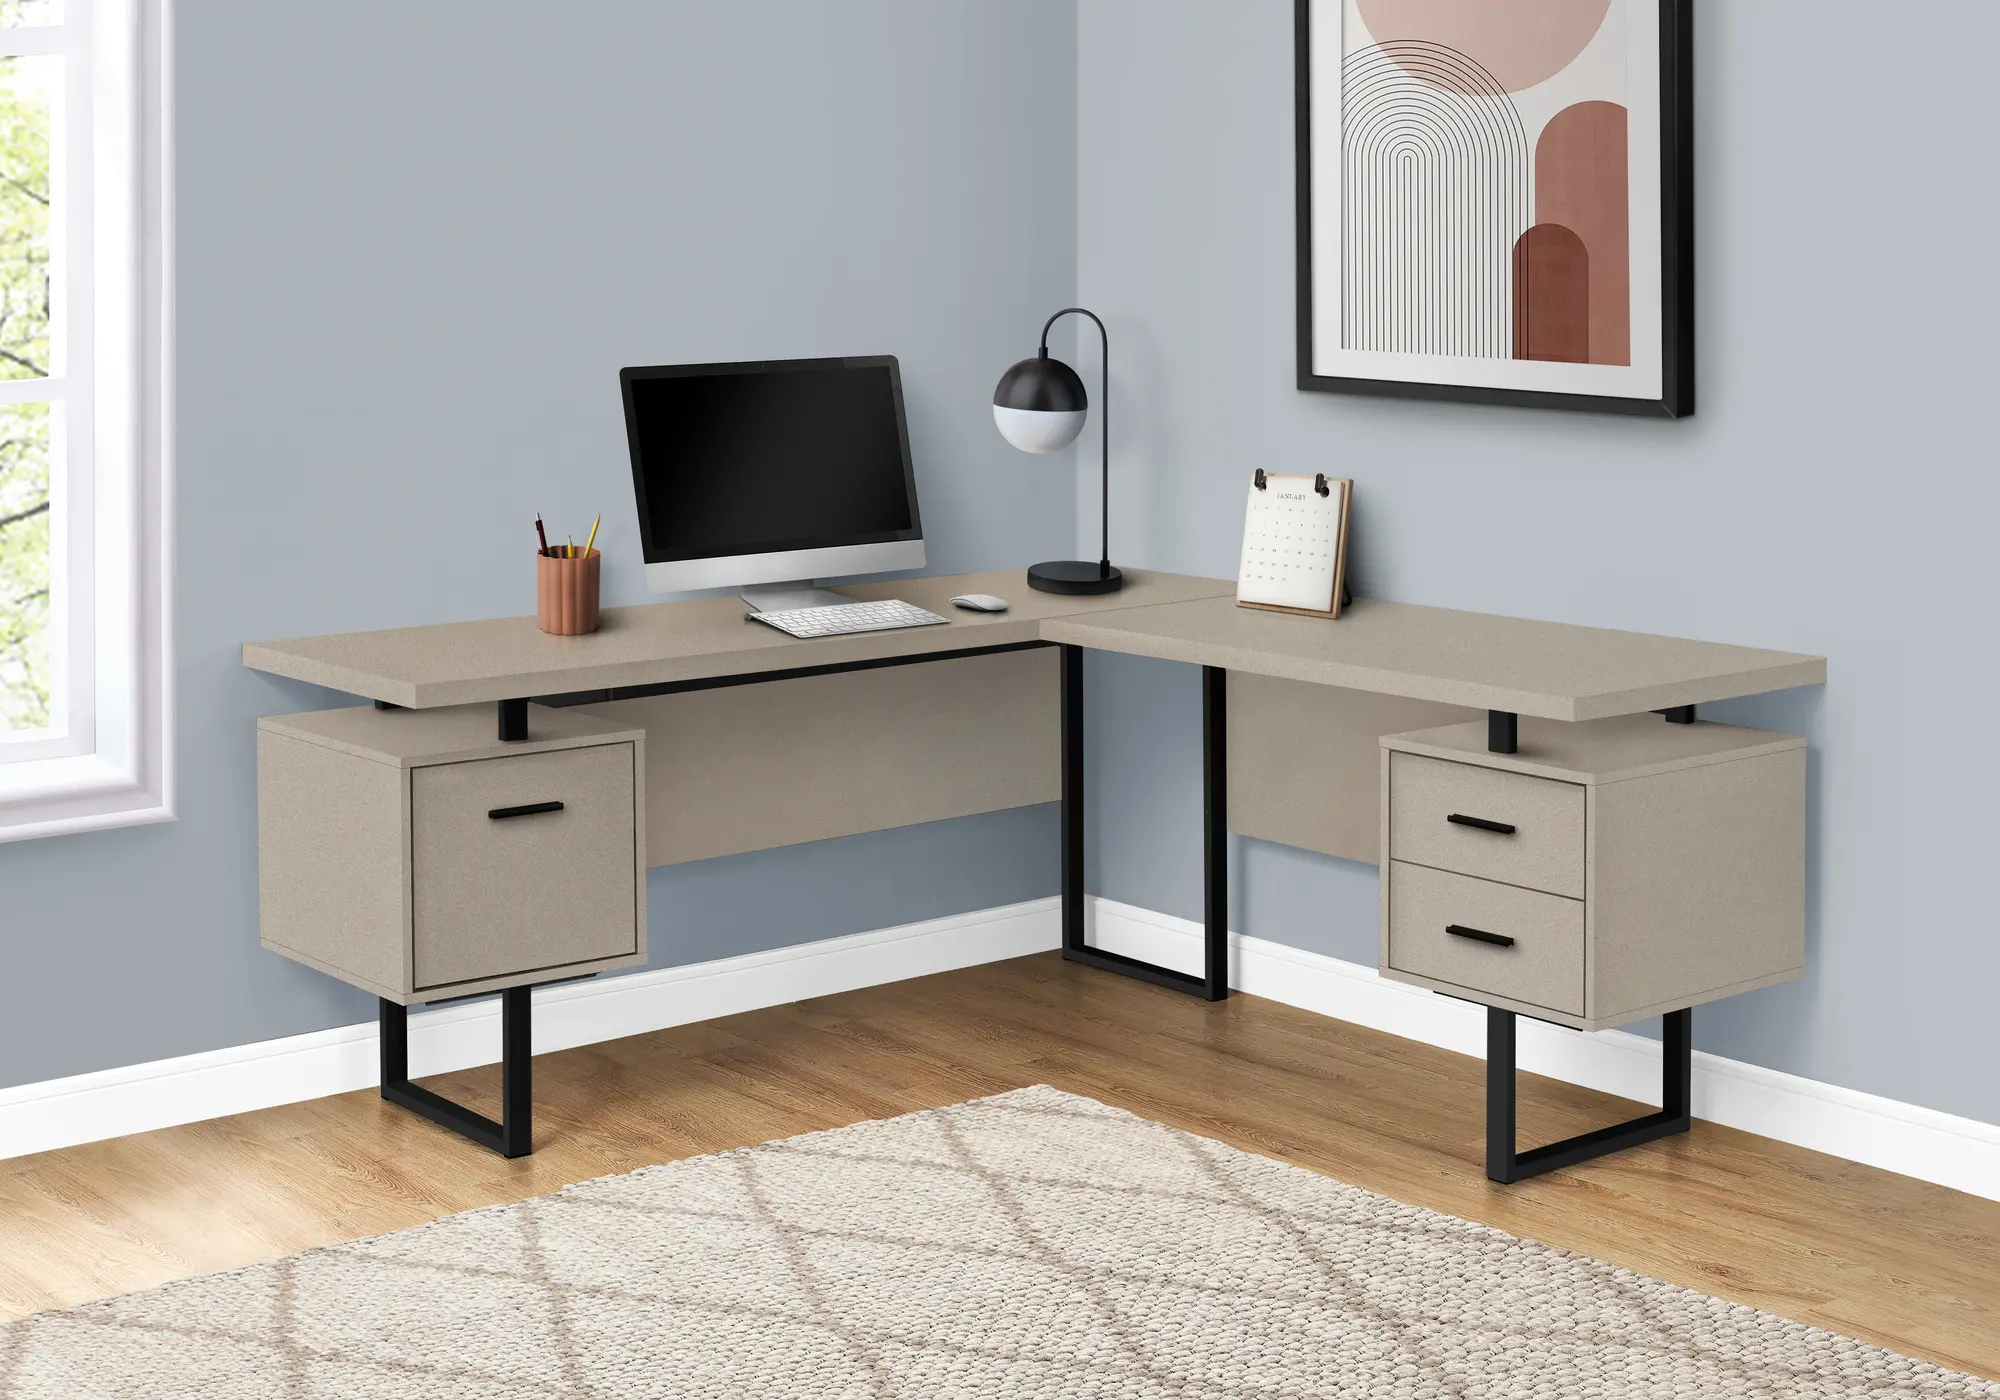 Photos - Office Desk Monarch Specialties Karner Taupe and Black L-Shaped Desk I 7614 